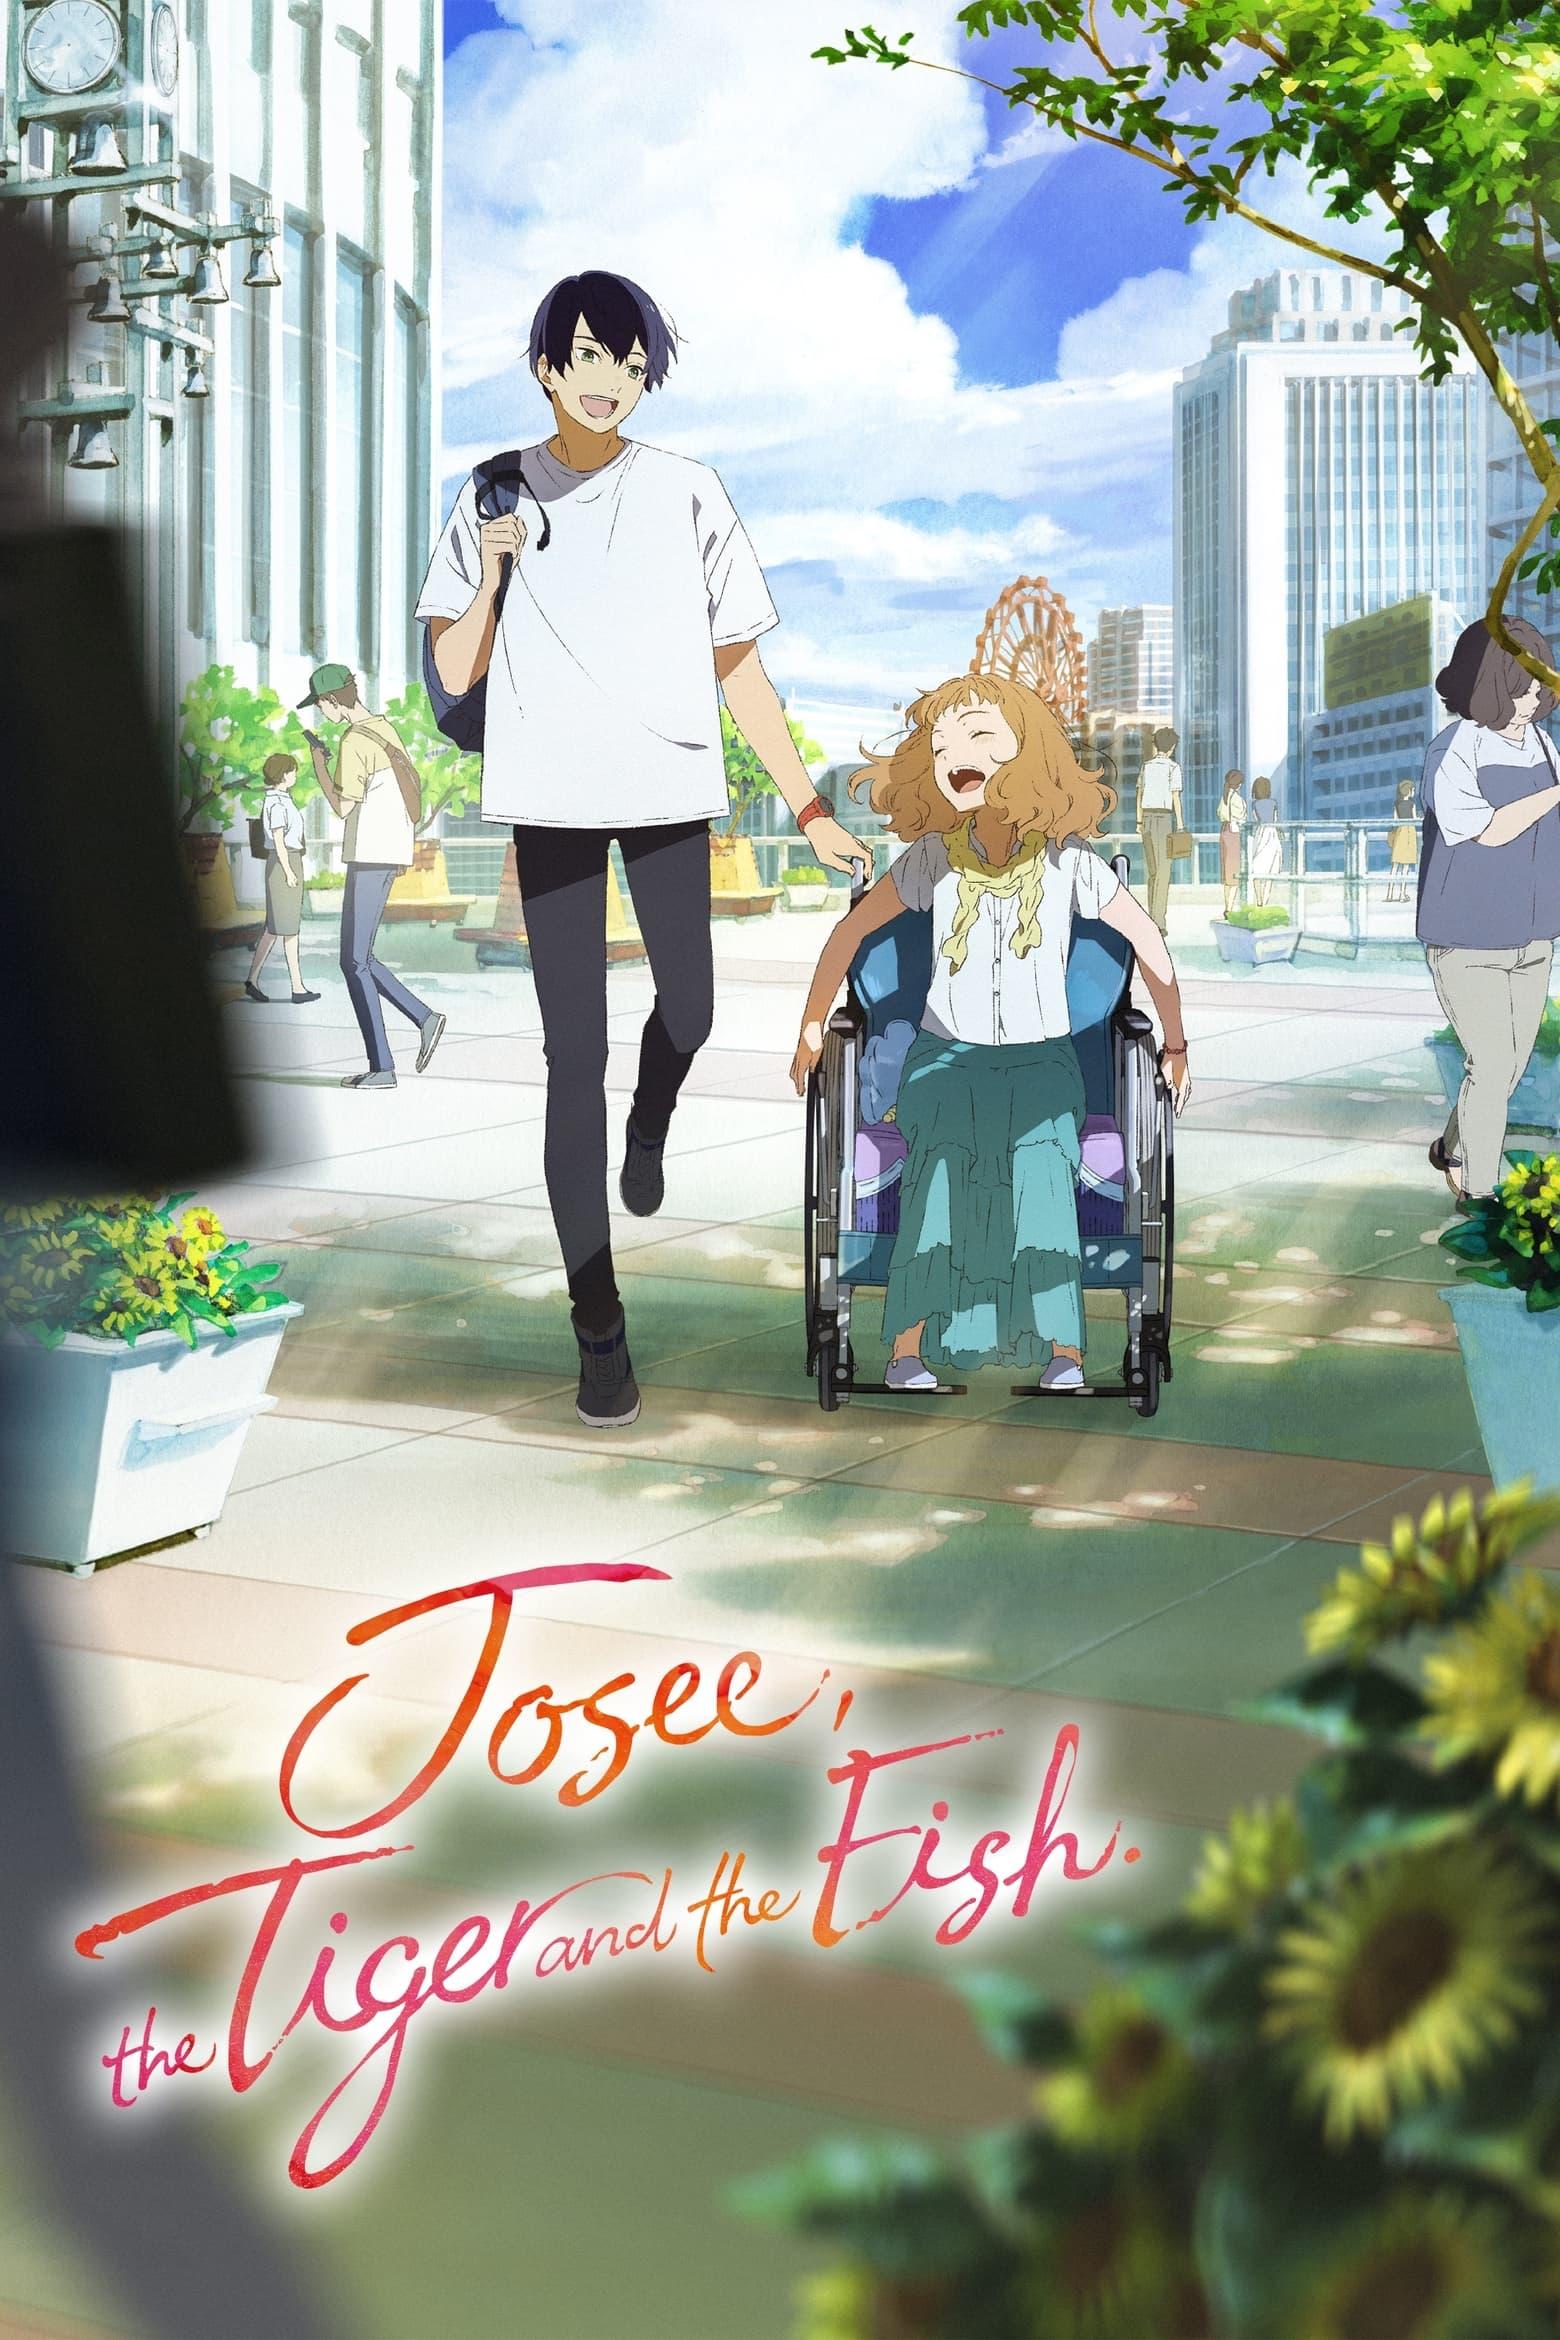 Josee, the Tiger and the Fish poster